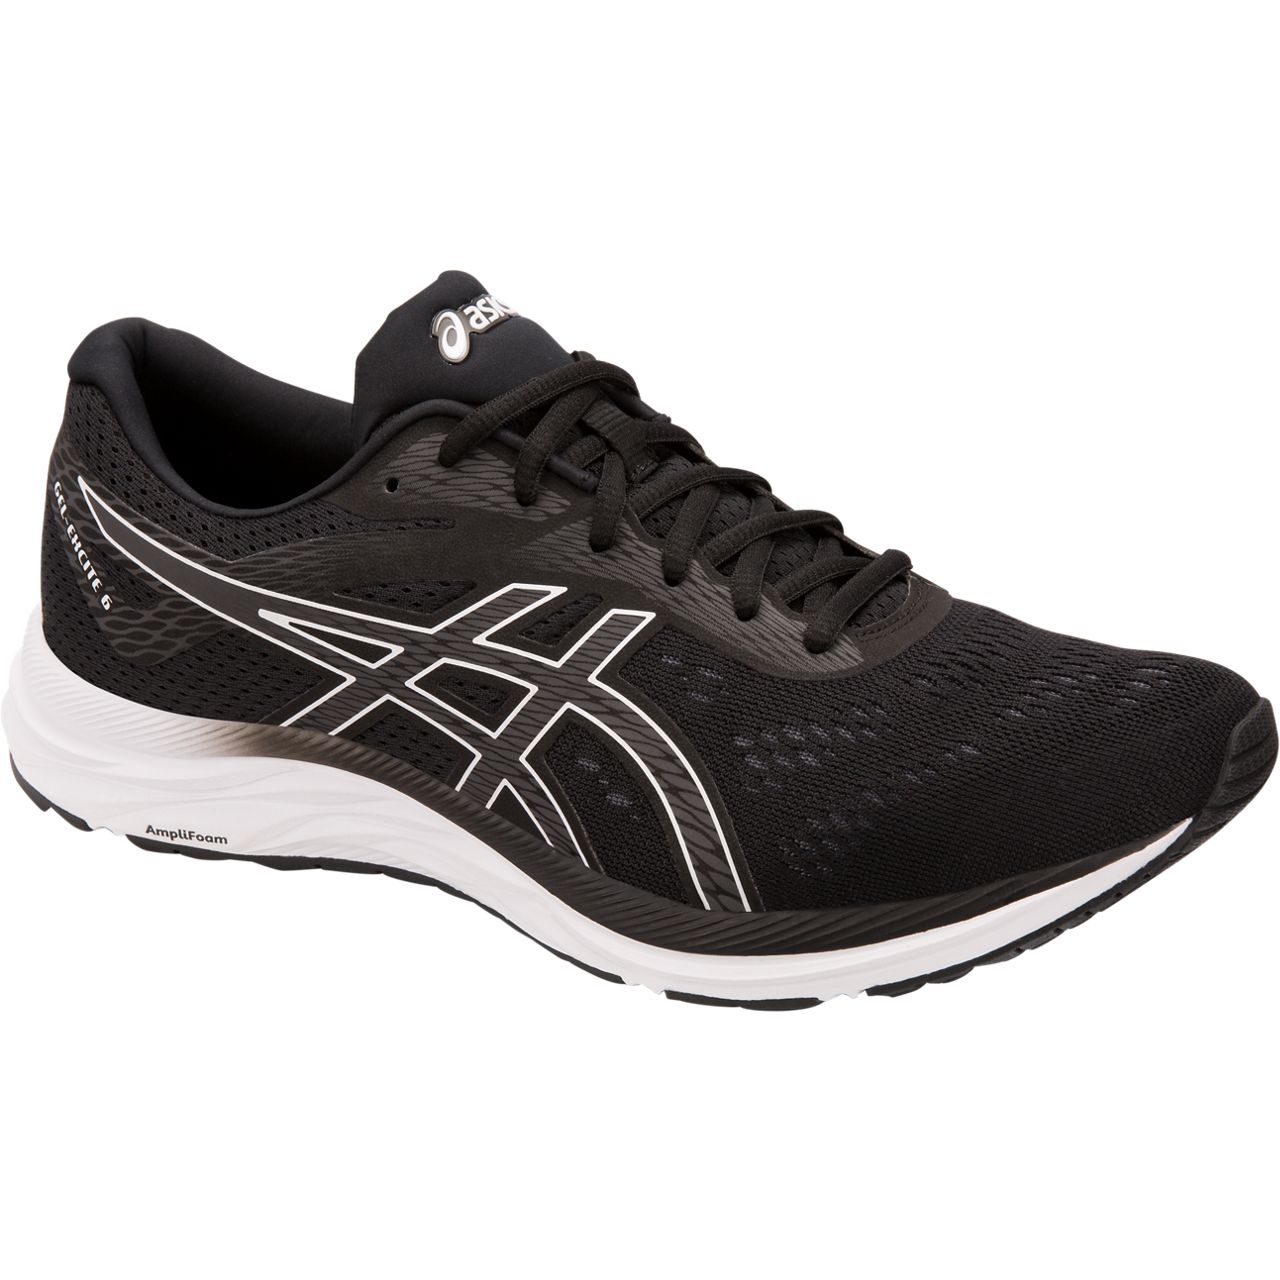 asics gel excite 6 men's running shoes review